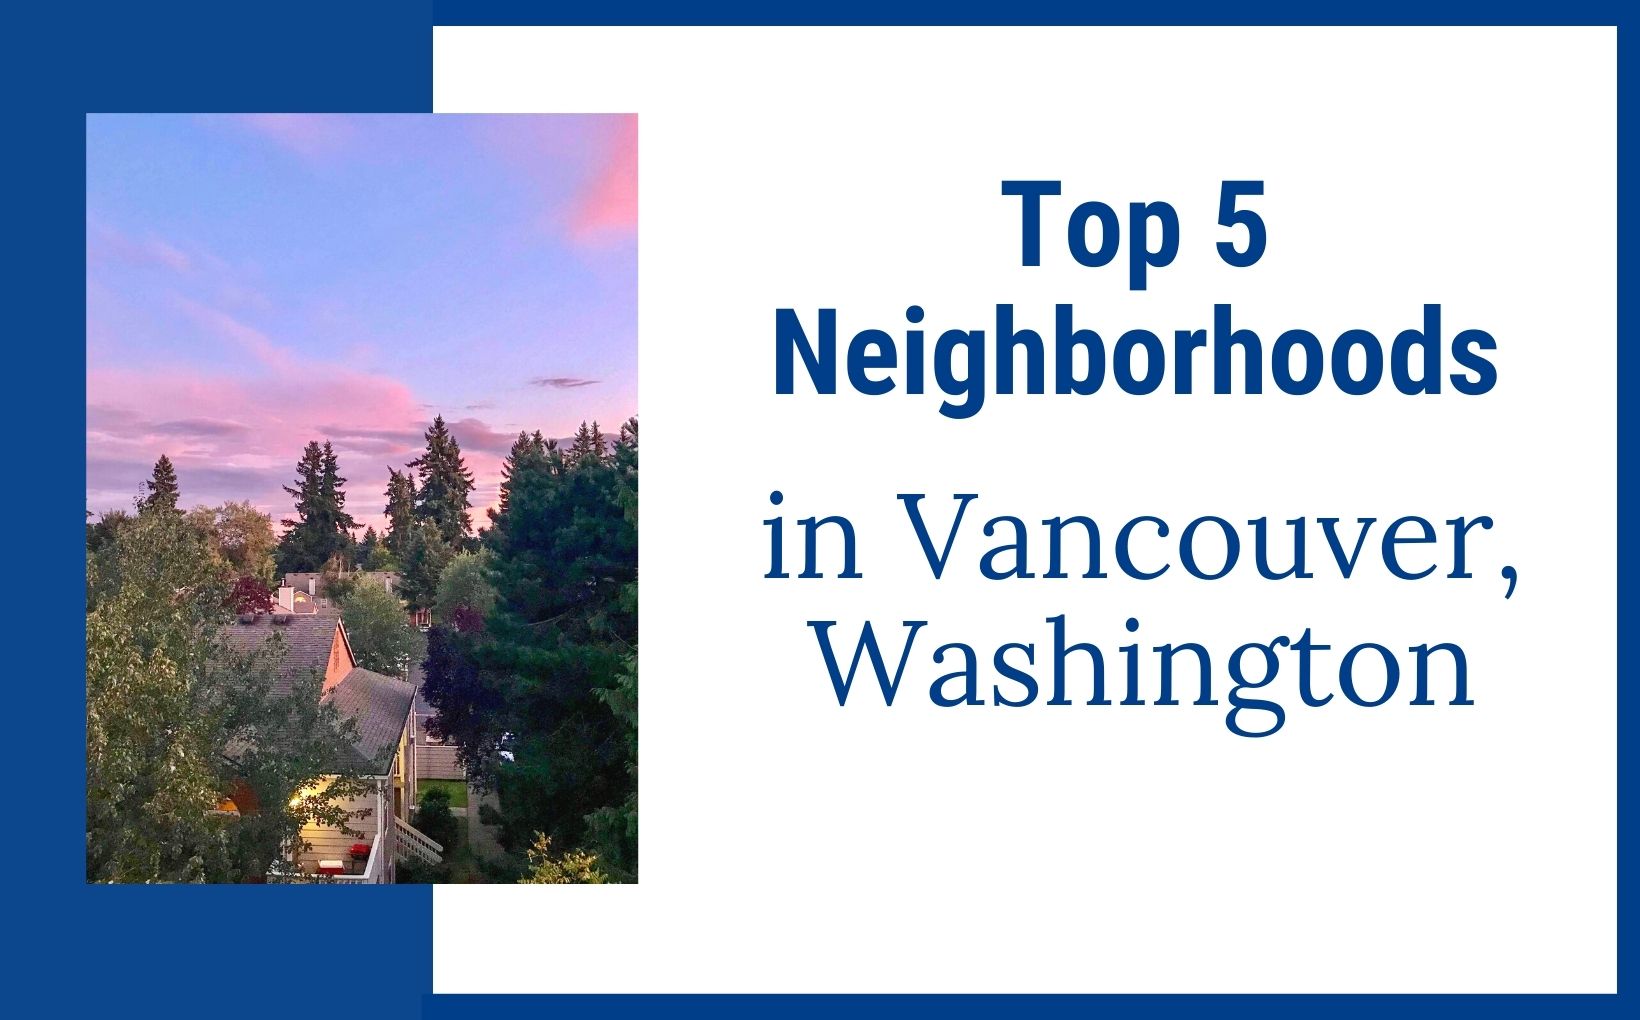 Top 5 Neighborhoods to live in Vancouver Washington feature image